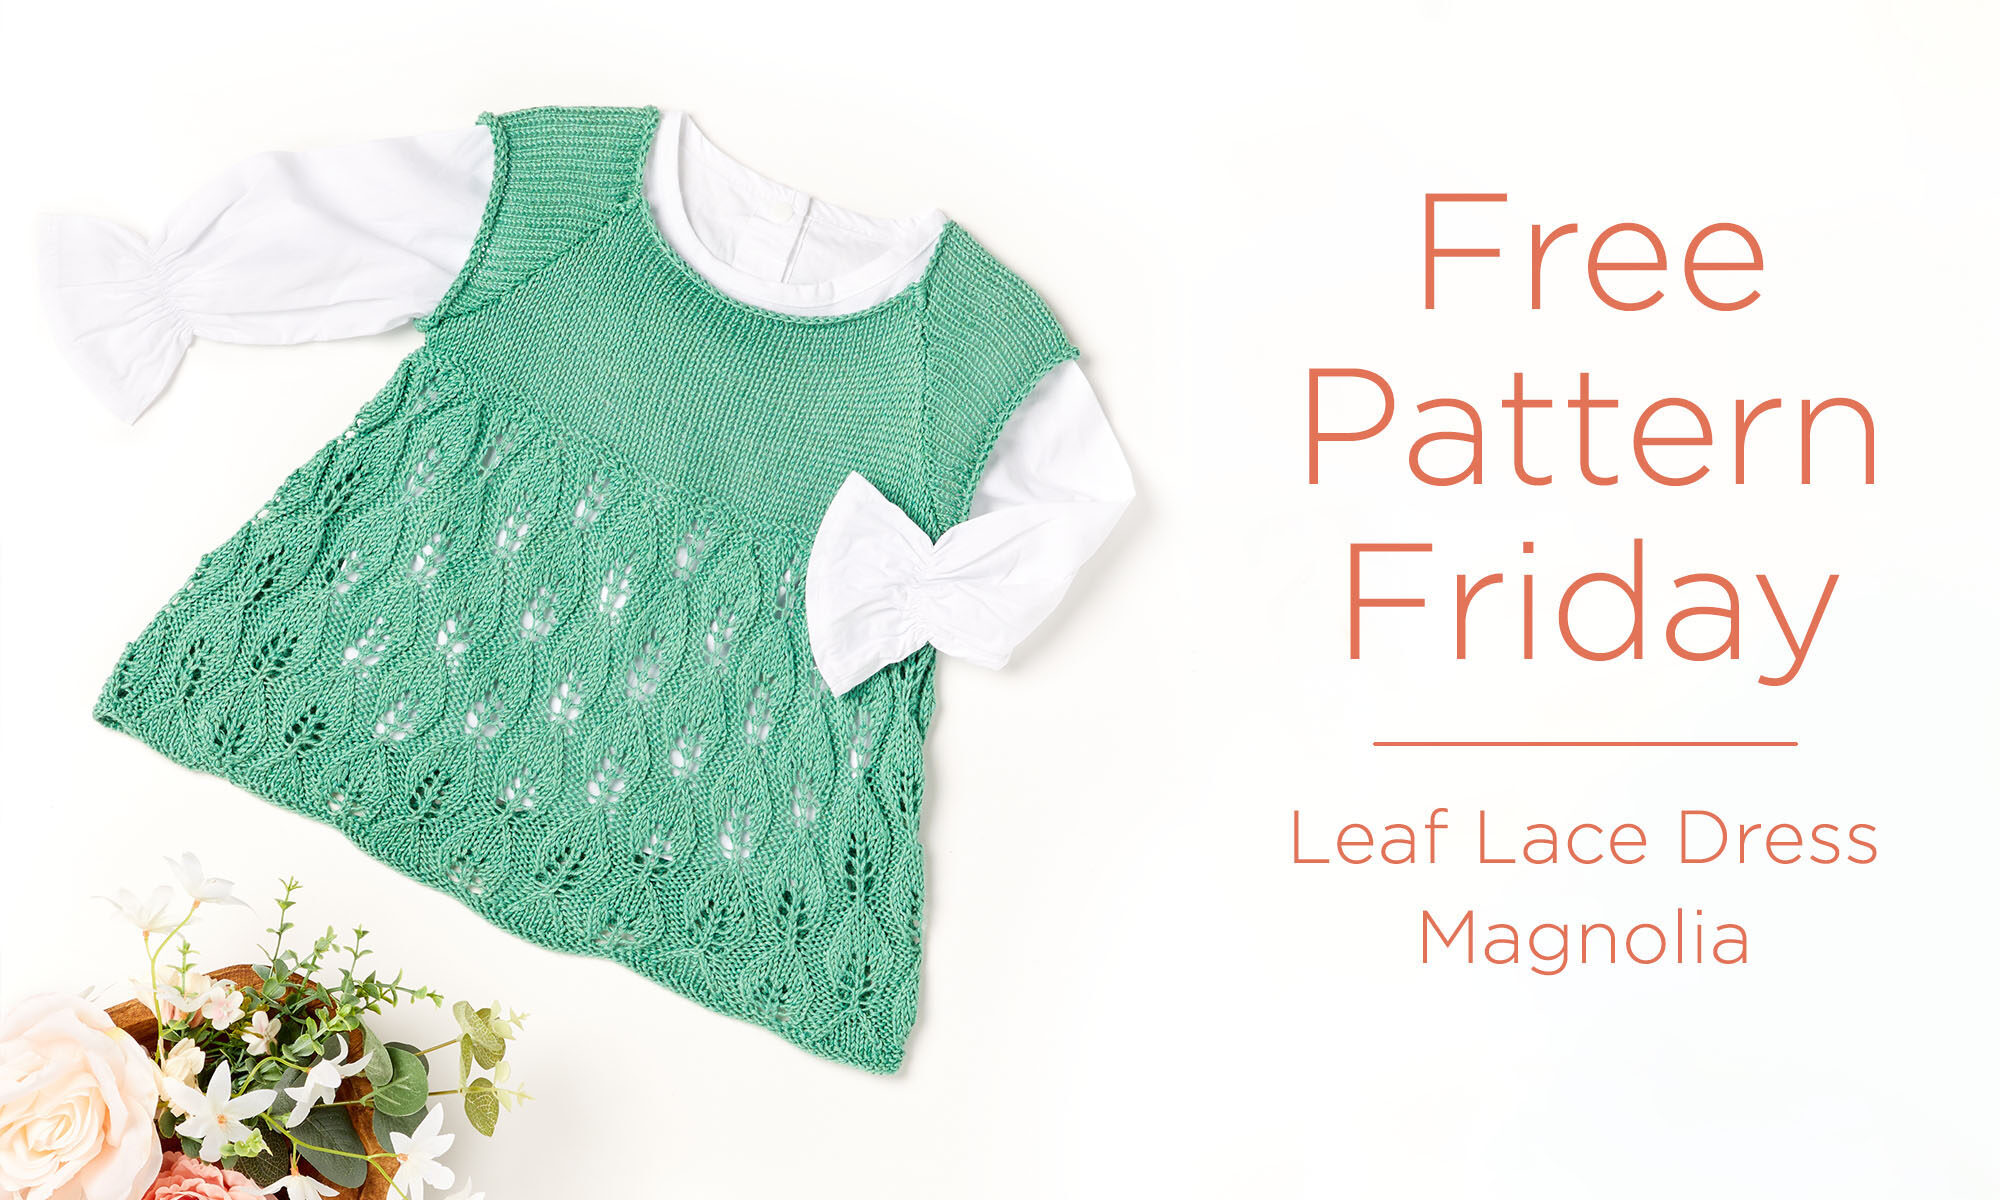 sleeveless knitted lace toddler dress paired with white top, laid flat. Text reads: Free Pattern Friday, Leaf Lace Dress in Magnolia